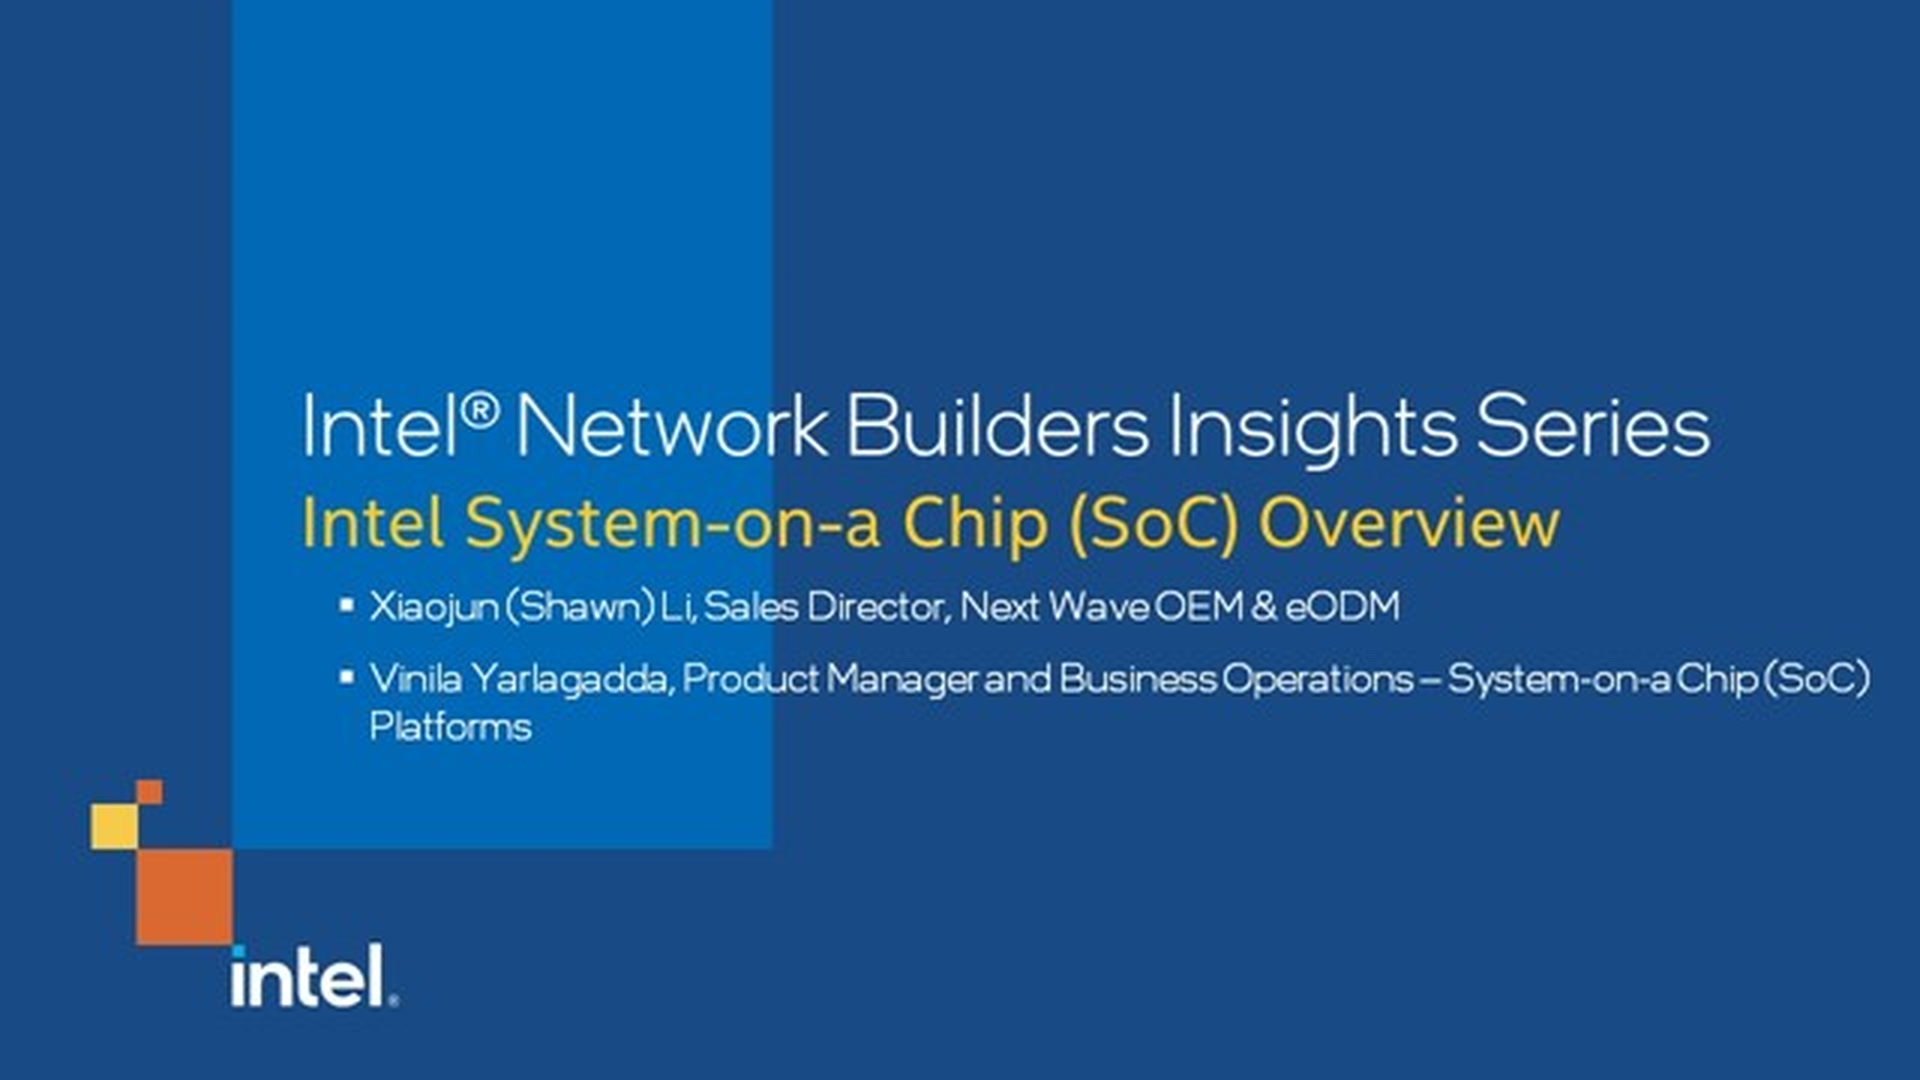 Intel System-on-a Chip (SoC) Overview